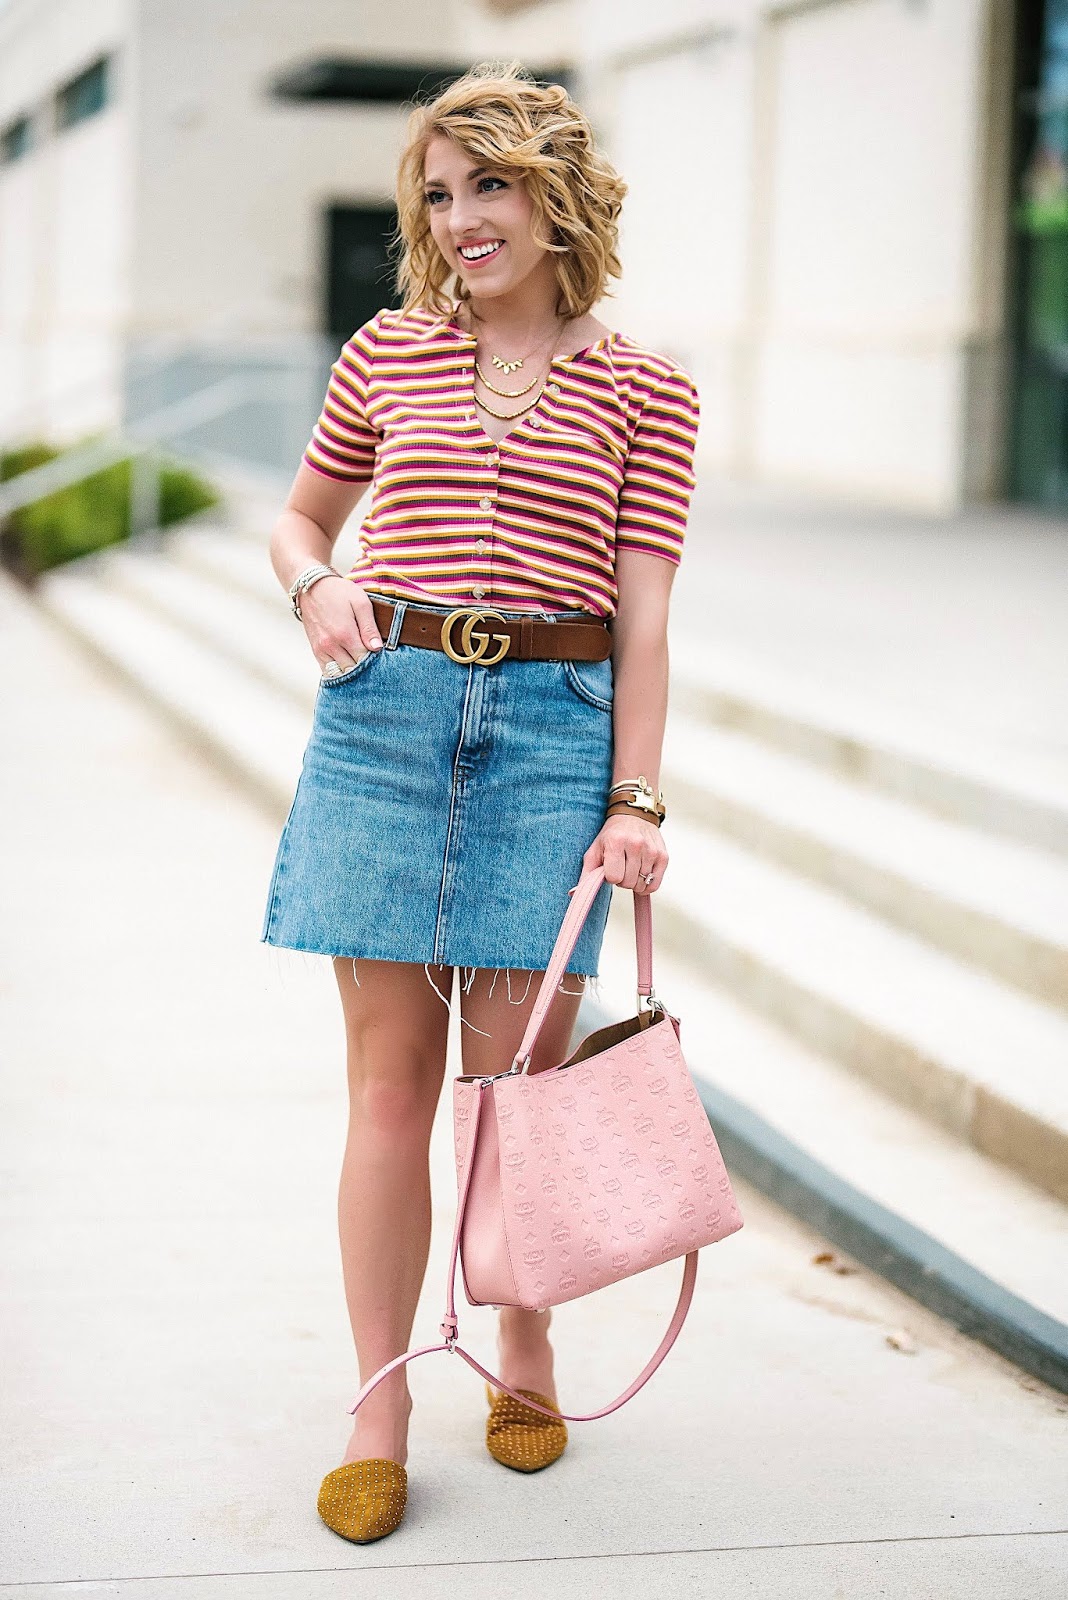 The Perfect Transition to Fall Look: Denim Skirt + Striped Sweater and Mules (All under $100) - Something Delightful Blog